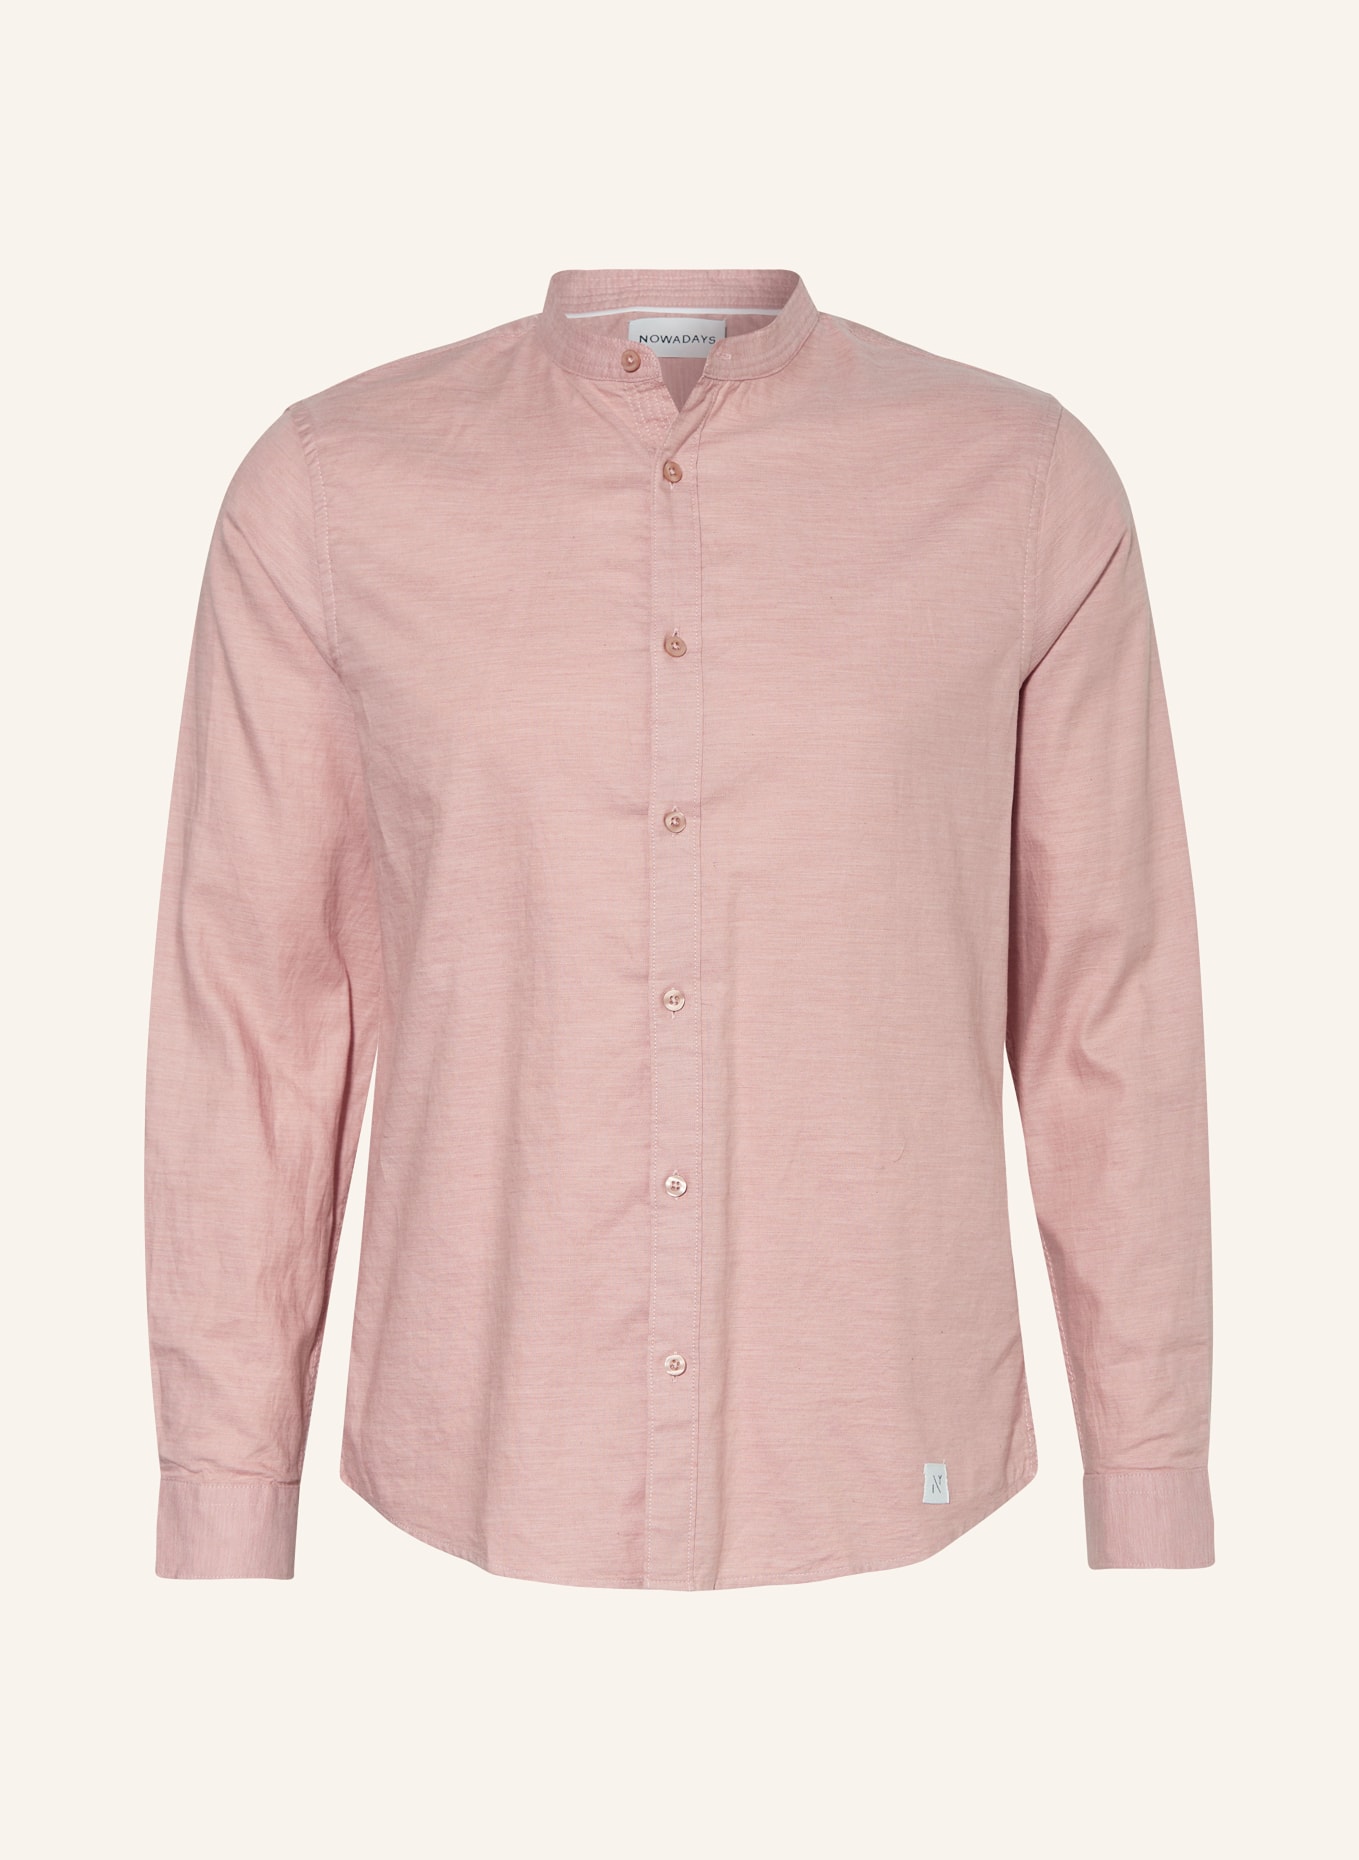 NOWADAYS Oxford shirt slim fit with stand-up collar, Color: ROSE (Image 1)